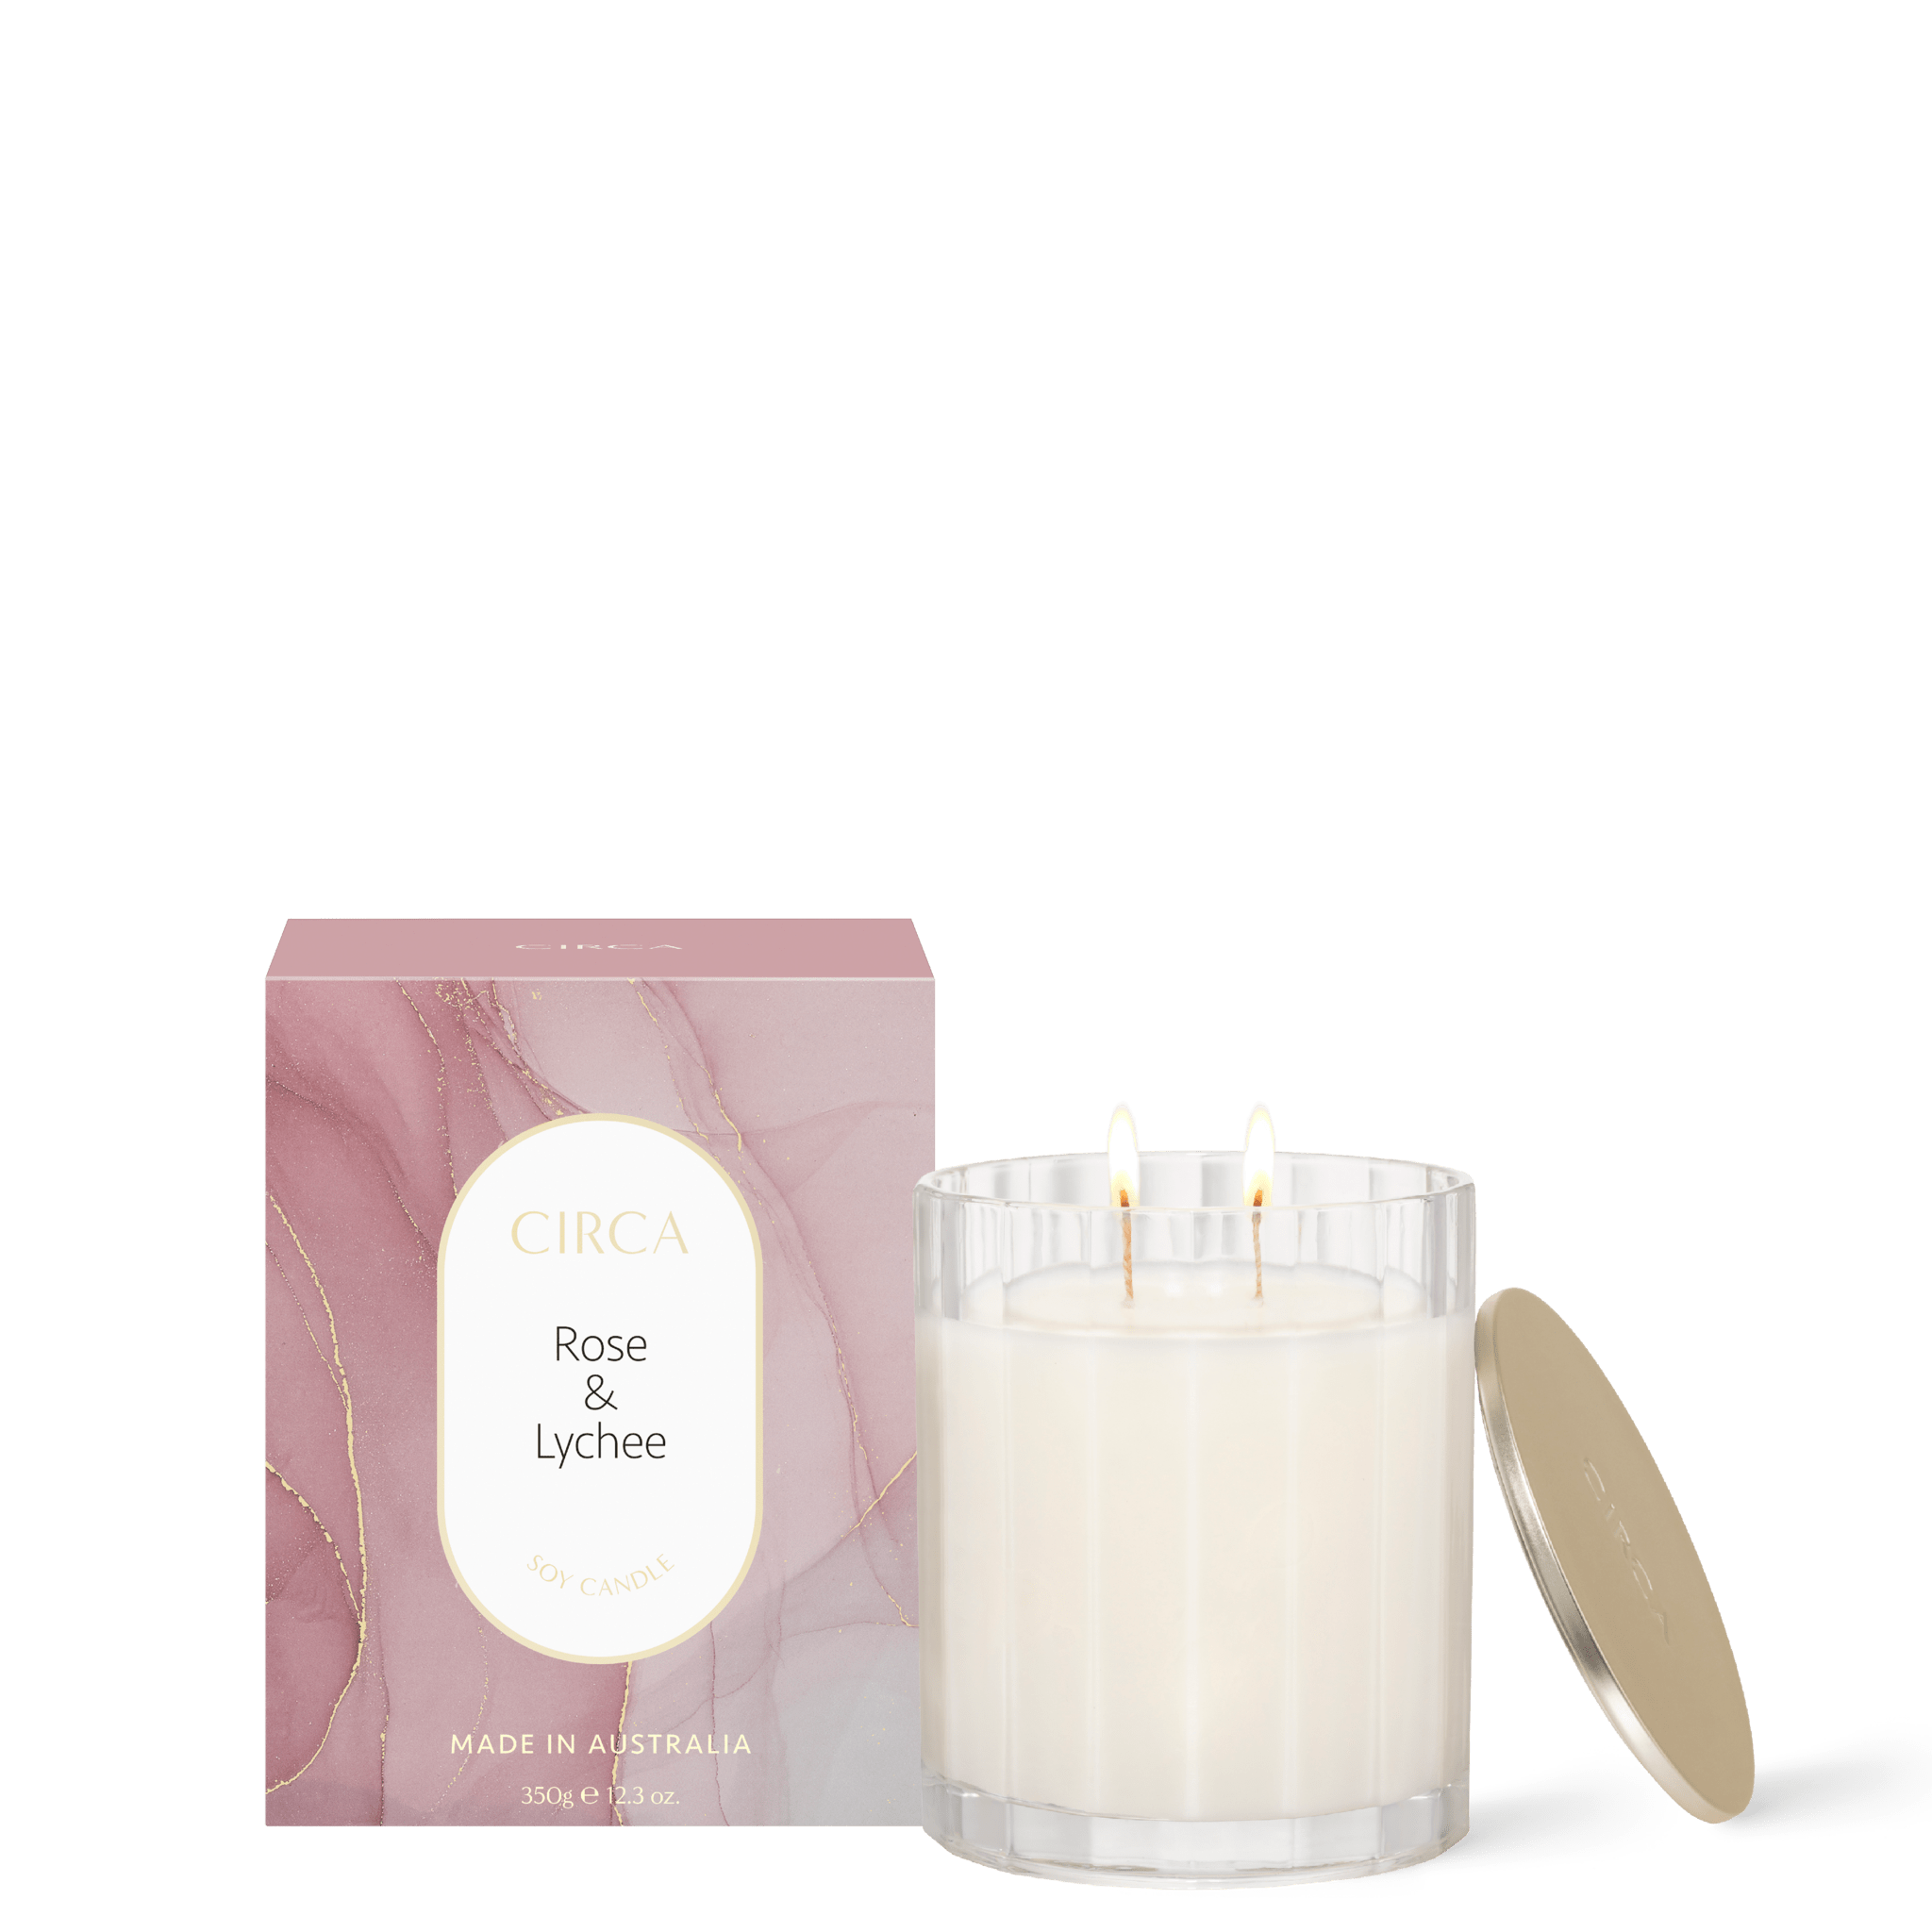 CIRCA Rose & Lychee Candle 350g